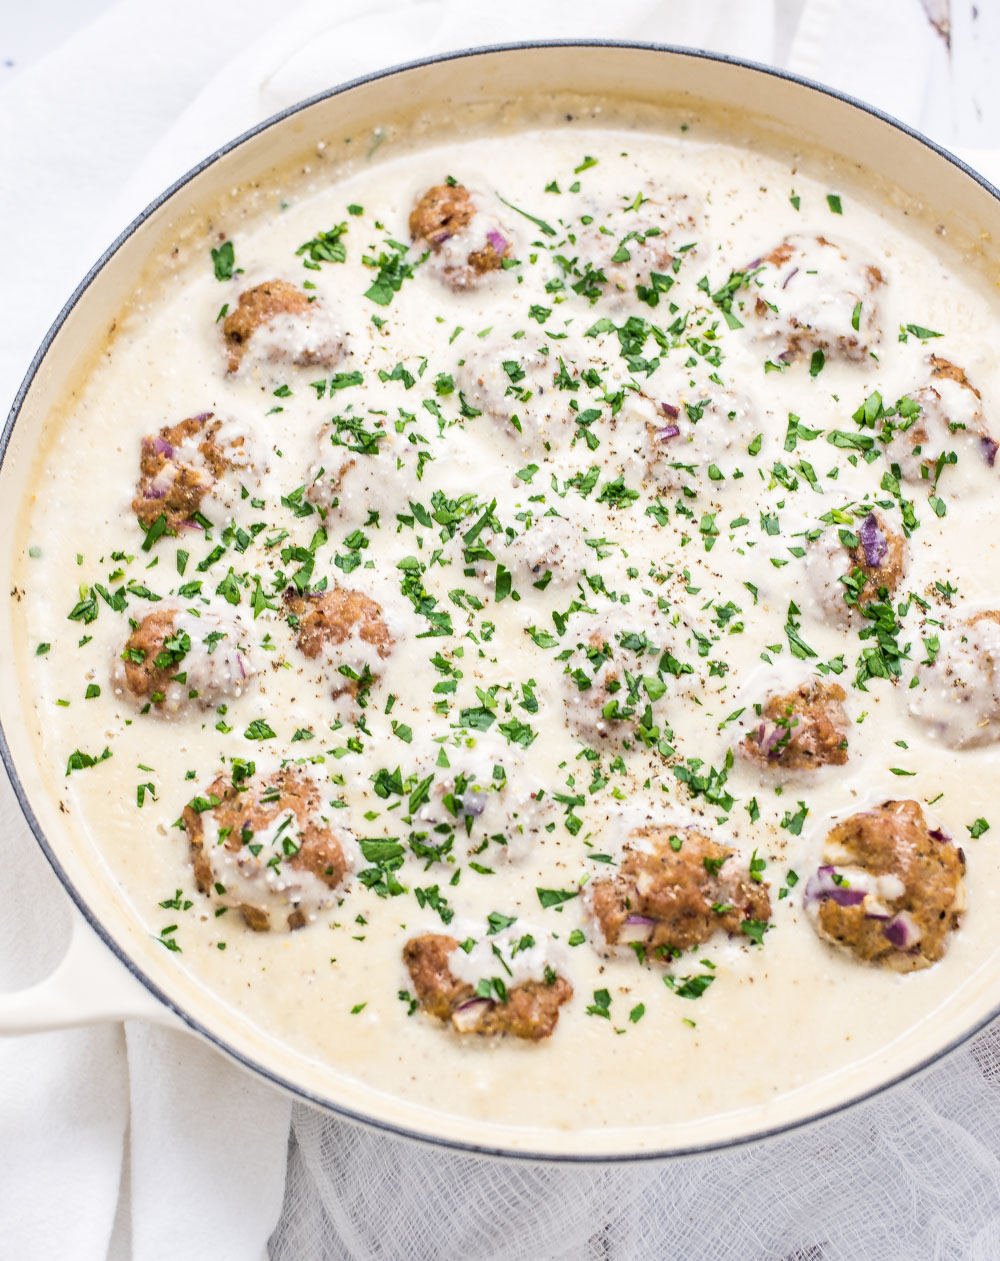 Light Almond Chicken Meatballs in Cauliflower Cream Sauce is a family-friendly weeknight meal that packs a lot of flavor, yet stays on the lighter side!